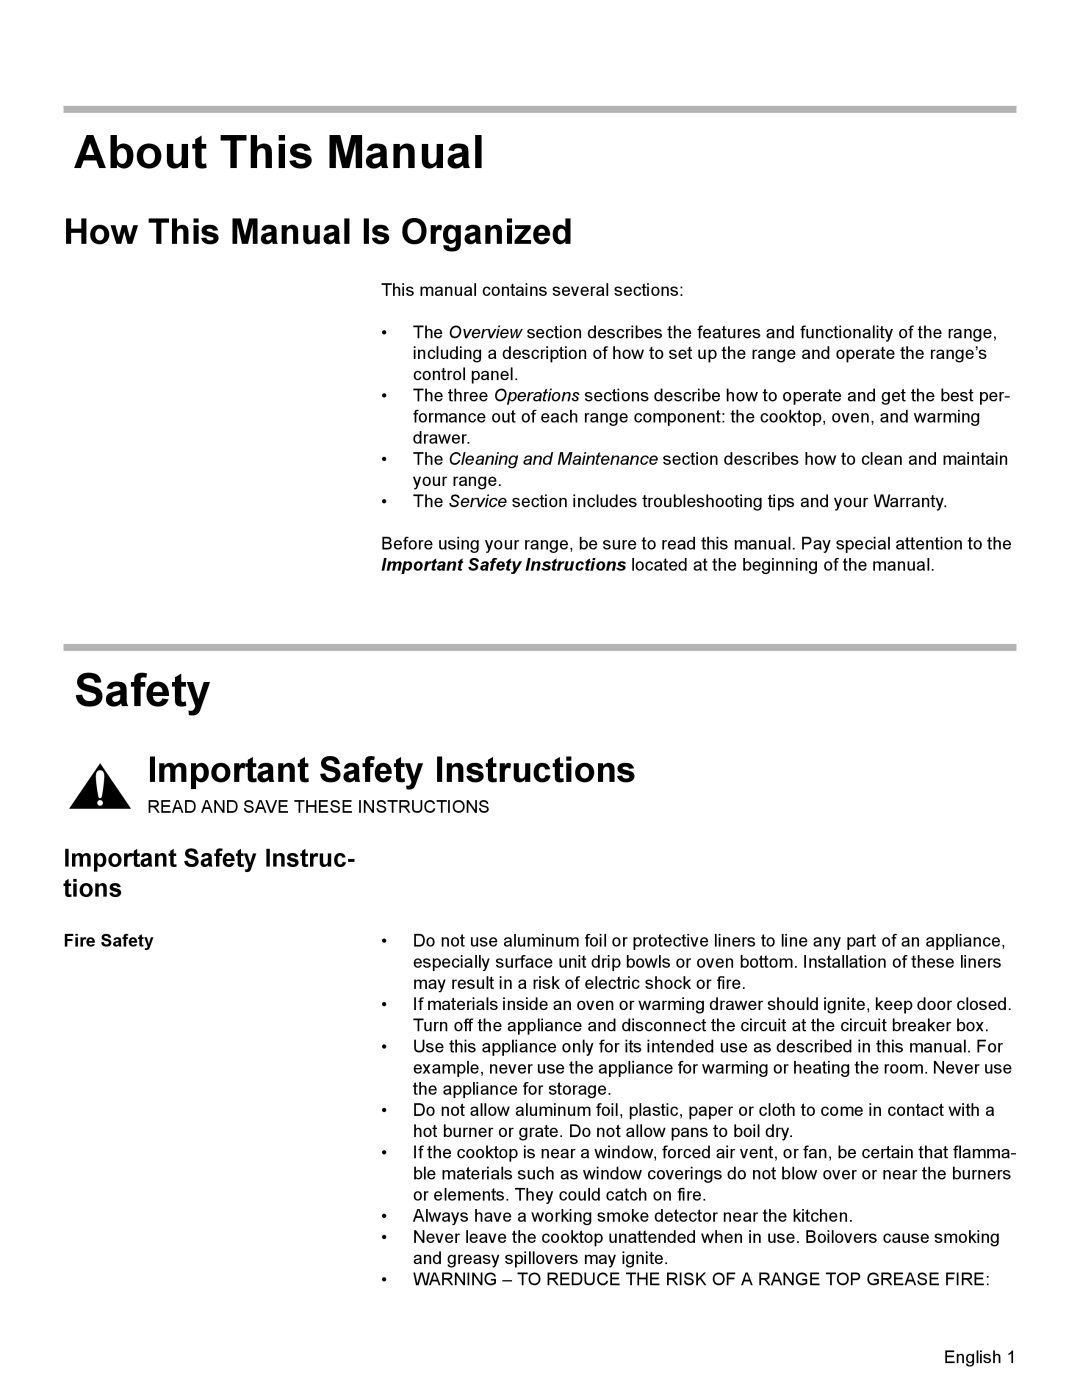 Bosch Appliances HES7052U About This Manual, How This Manual Is Organized, Important Safety Instructions, Fire Safety 